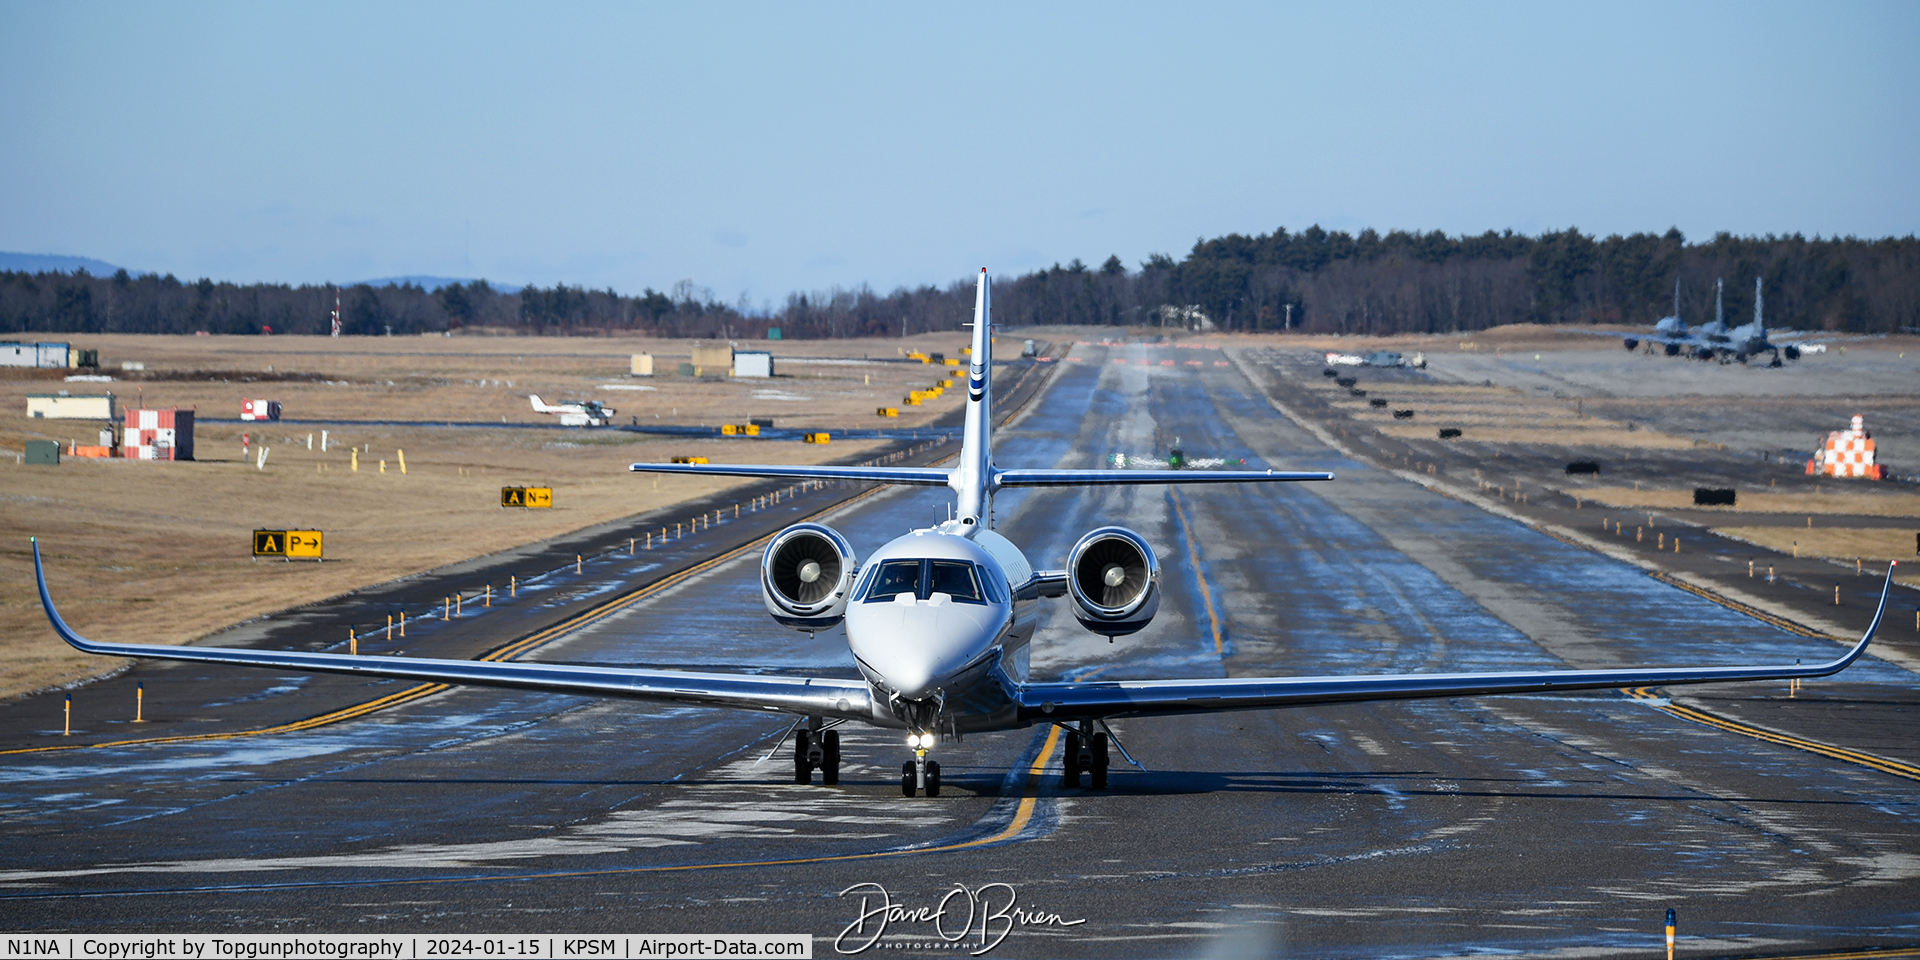 N1NA, 2007 Cessna 680 Citation Sovereign C/N 680-0141, Taxiing back to RW34 after landing